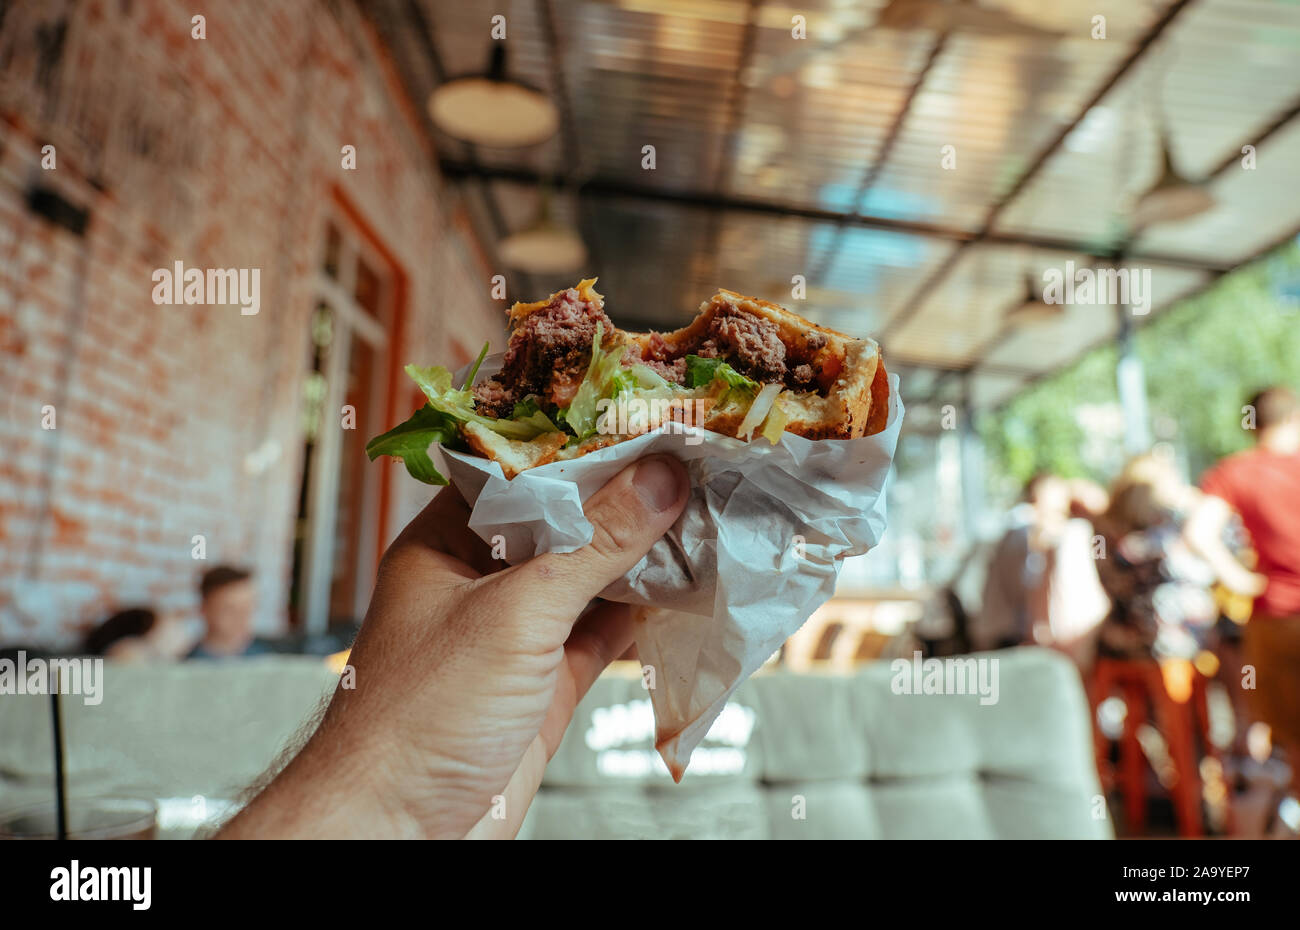 Tasty Hamburger with ham and salad in the man's hand Stock Photo